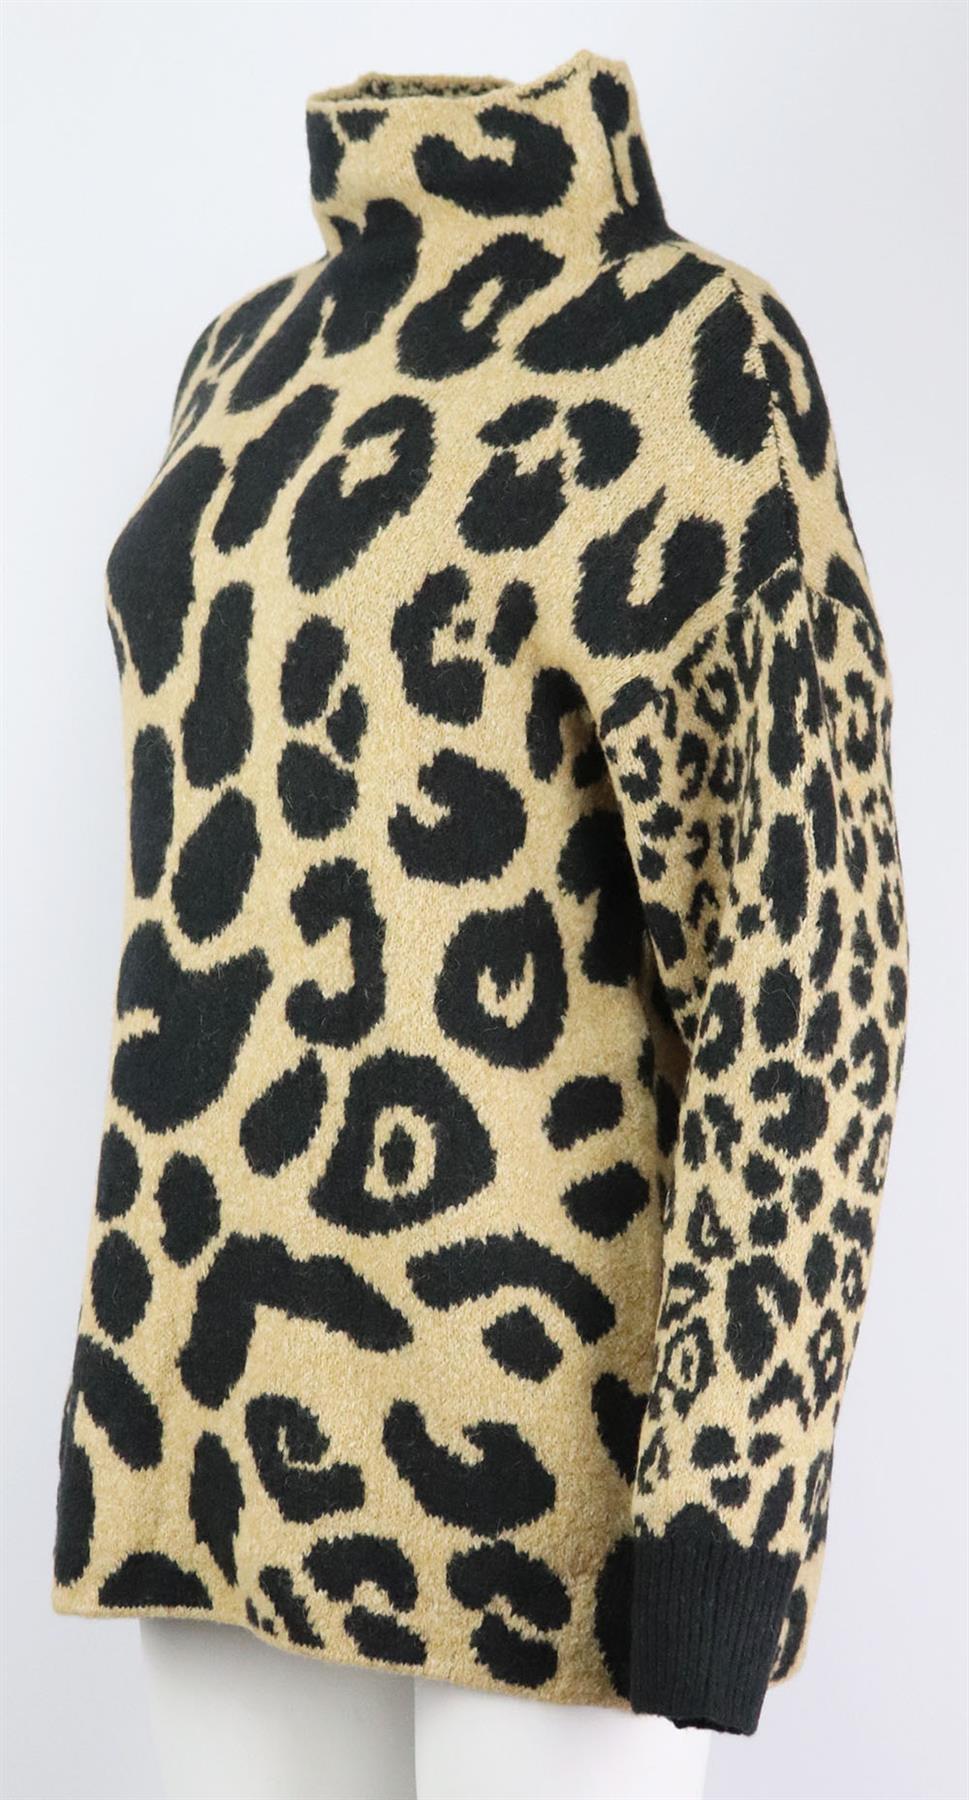 This sweater by Stella McCartney is spun in Italy from a blend that includes intarsia-knitted leopard pattern cotton and fluffy alpaca, it has a mock neck and dropped shoulders. Beige and black cotton, alpaca, polyamide and elastane-blend. Slips on.